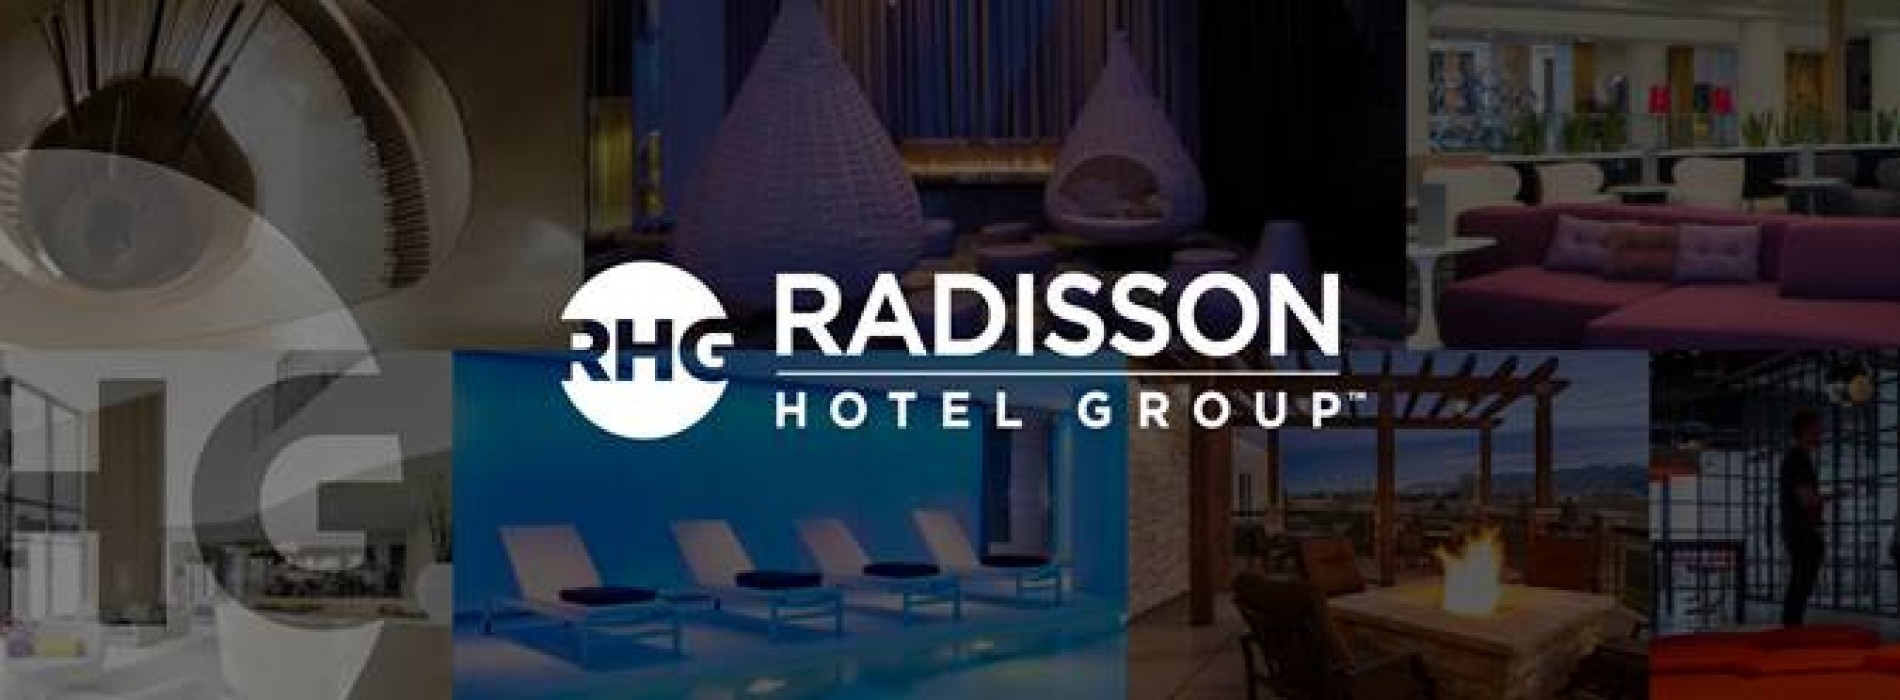 Radisson Hotel Group launches new property in Ningbo